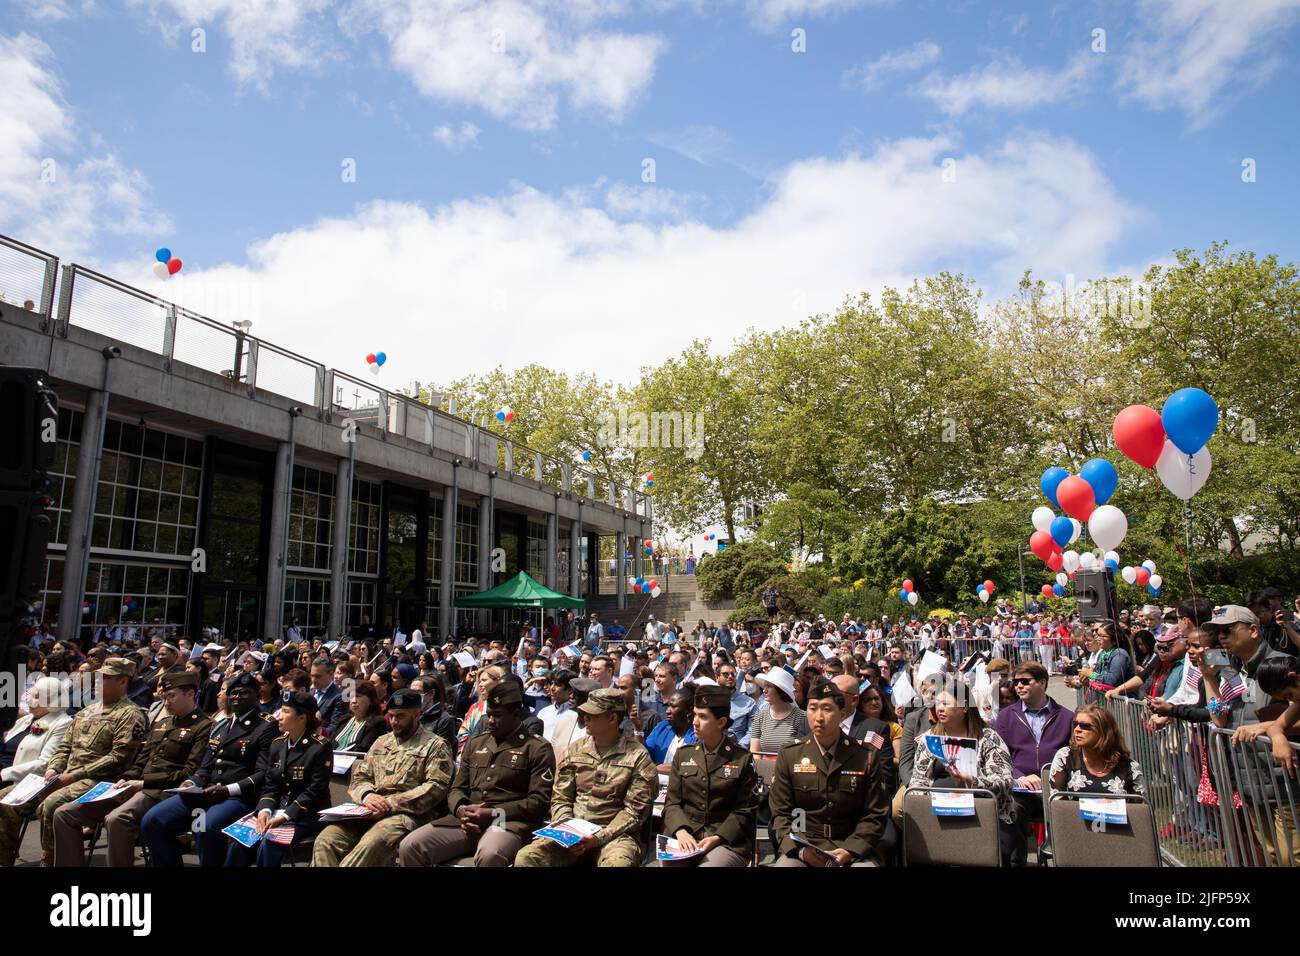 Seattle, Washington, USA. 4th July, 2022. Hundreds gather to witness a naturalization ceremony at Fisher Pavilion. The U.S. Citizenship and Immigration Services and U.S. District Court for the Western District of Washington partnered with Seattle Center to host the annual ceremony welcoming 300 applicants from 74 countries as new citizens. Credit: Paul Christian Gordon/Alamy Live News Stock Photo